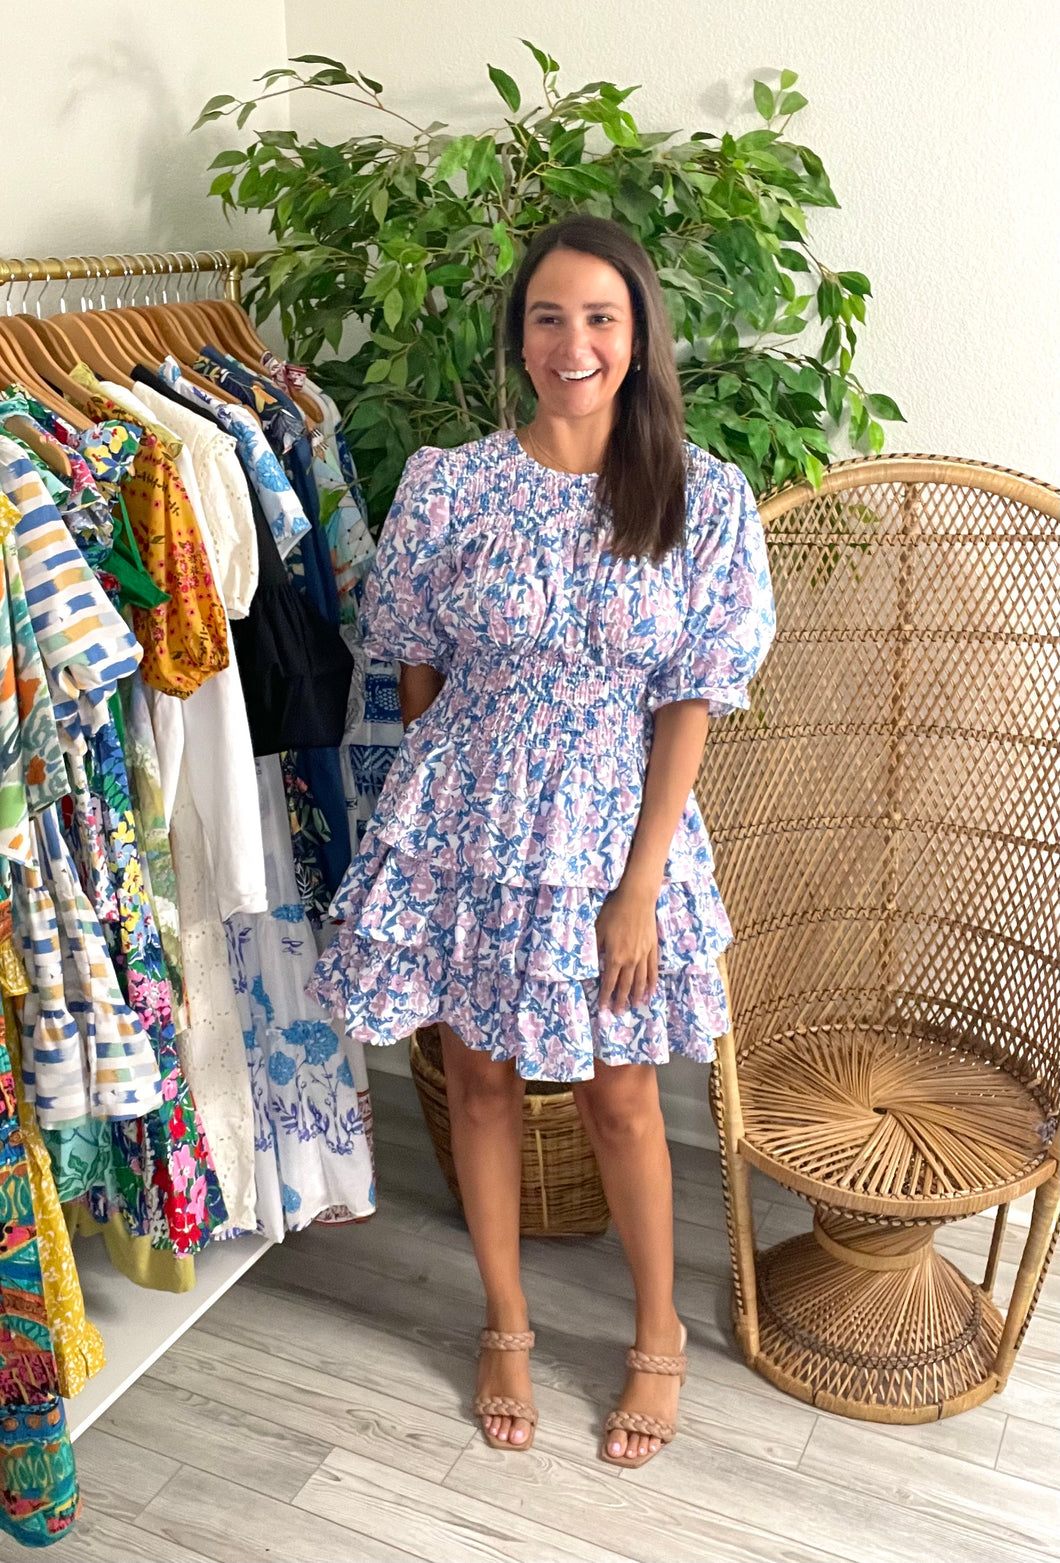 Floral printed blue and print mini dress. Ruffle detailing at neckline and sleeves. Triple tiered skirt with smocked bodice. Cotton blend.   True to size, wearing size small.